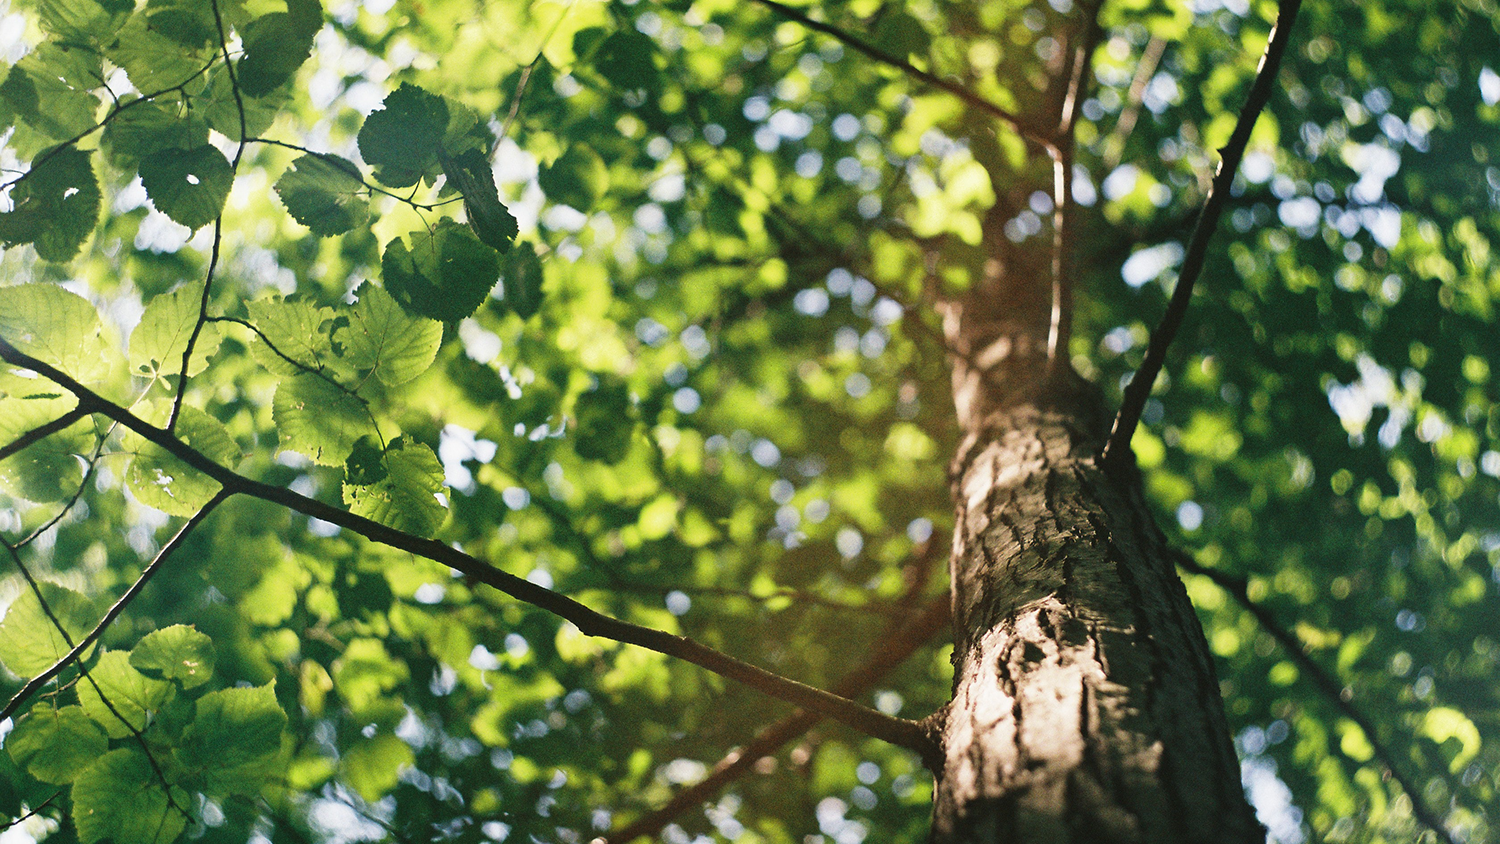 Tree trunk with green leaves - Climate Change May Cut America's Forest Inventory by a Fifth This Century - College of Natural Resources News NC State University